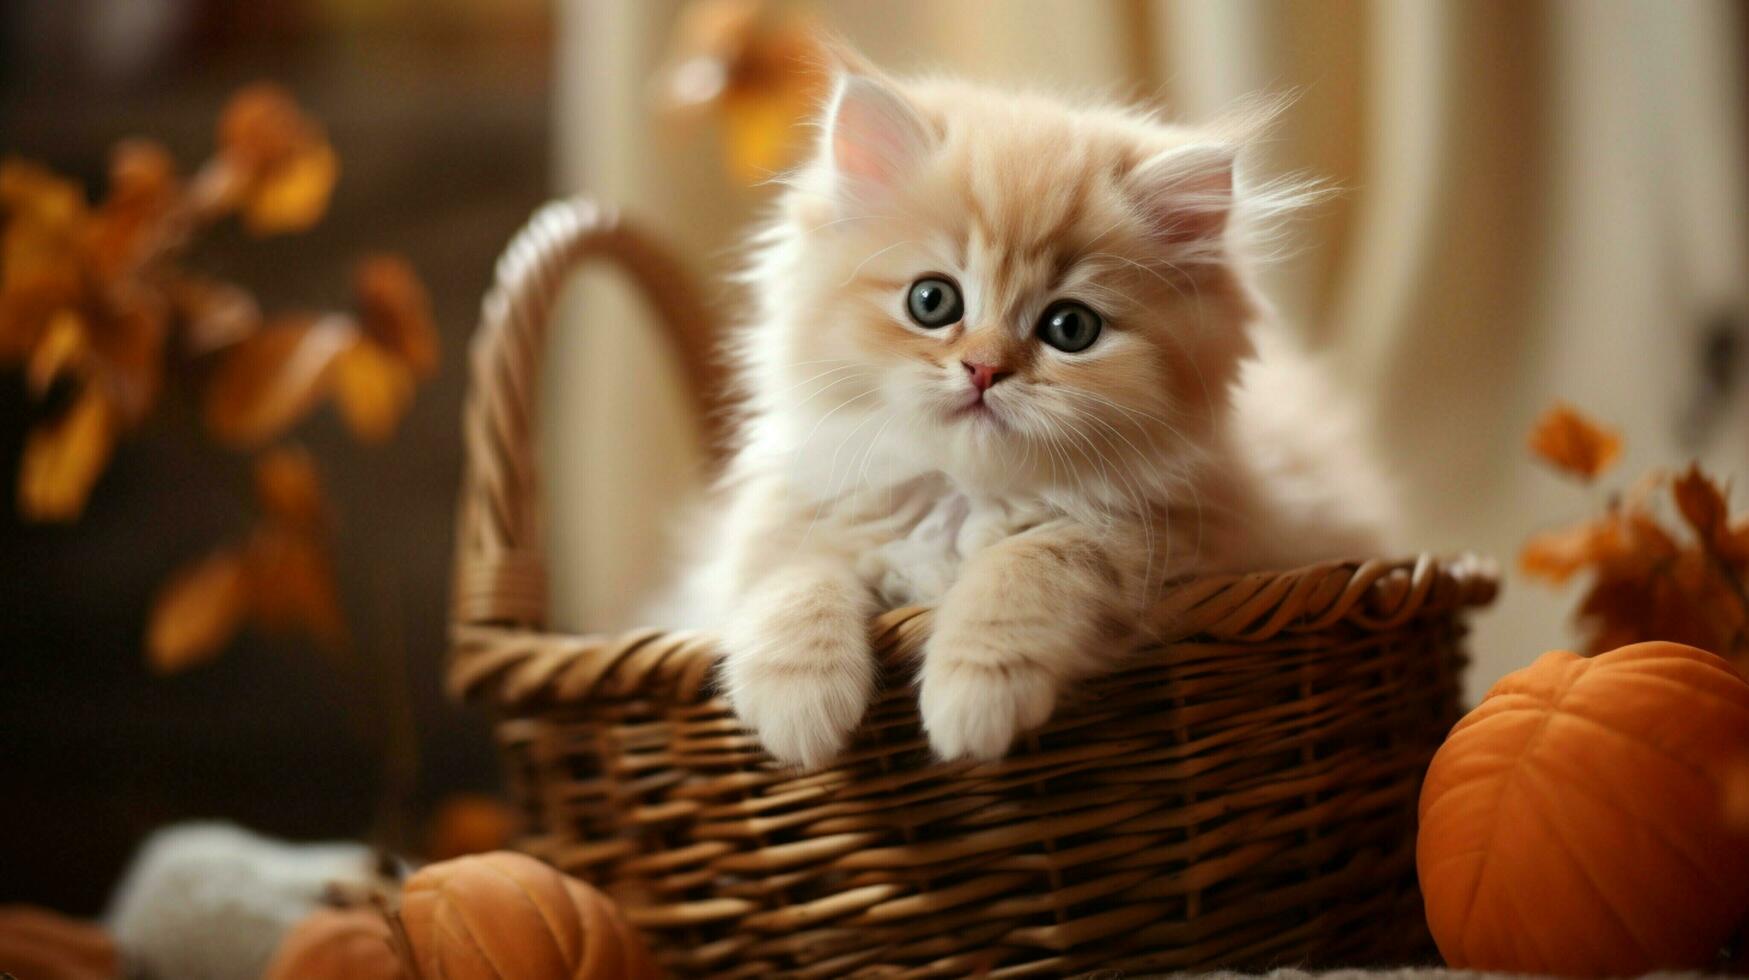 cute kitten sitting in a basket fluffy fur and whiskers photo